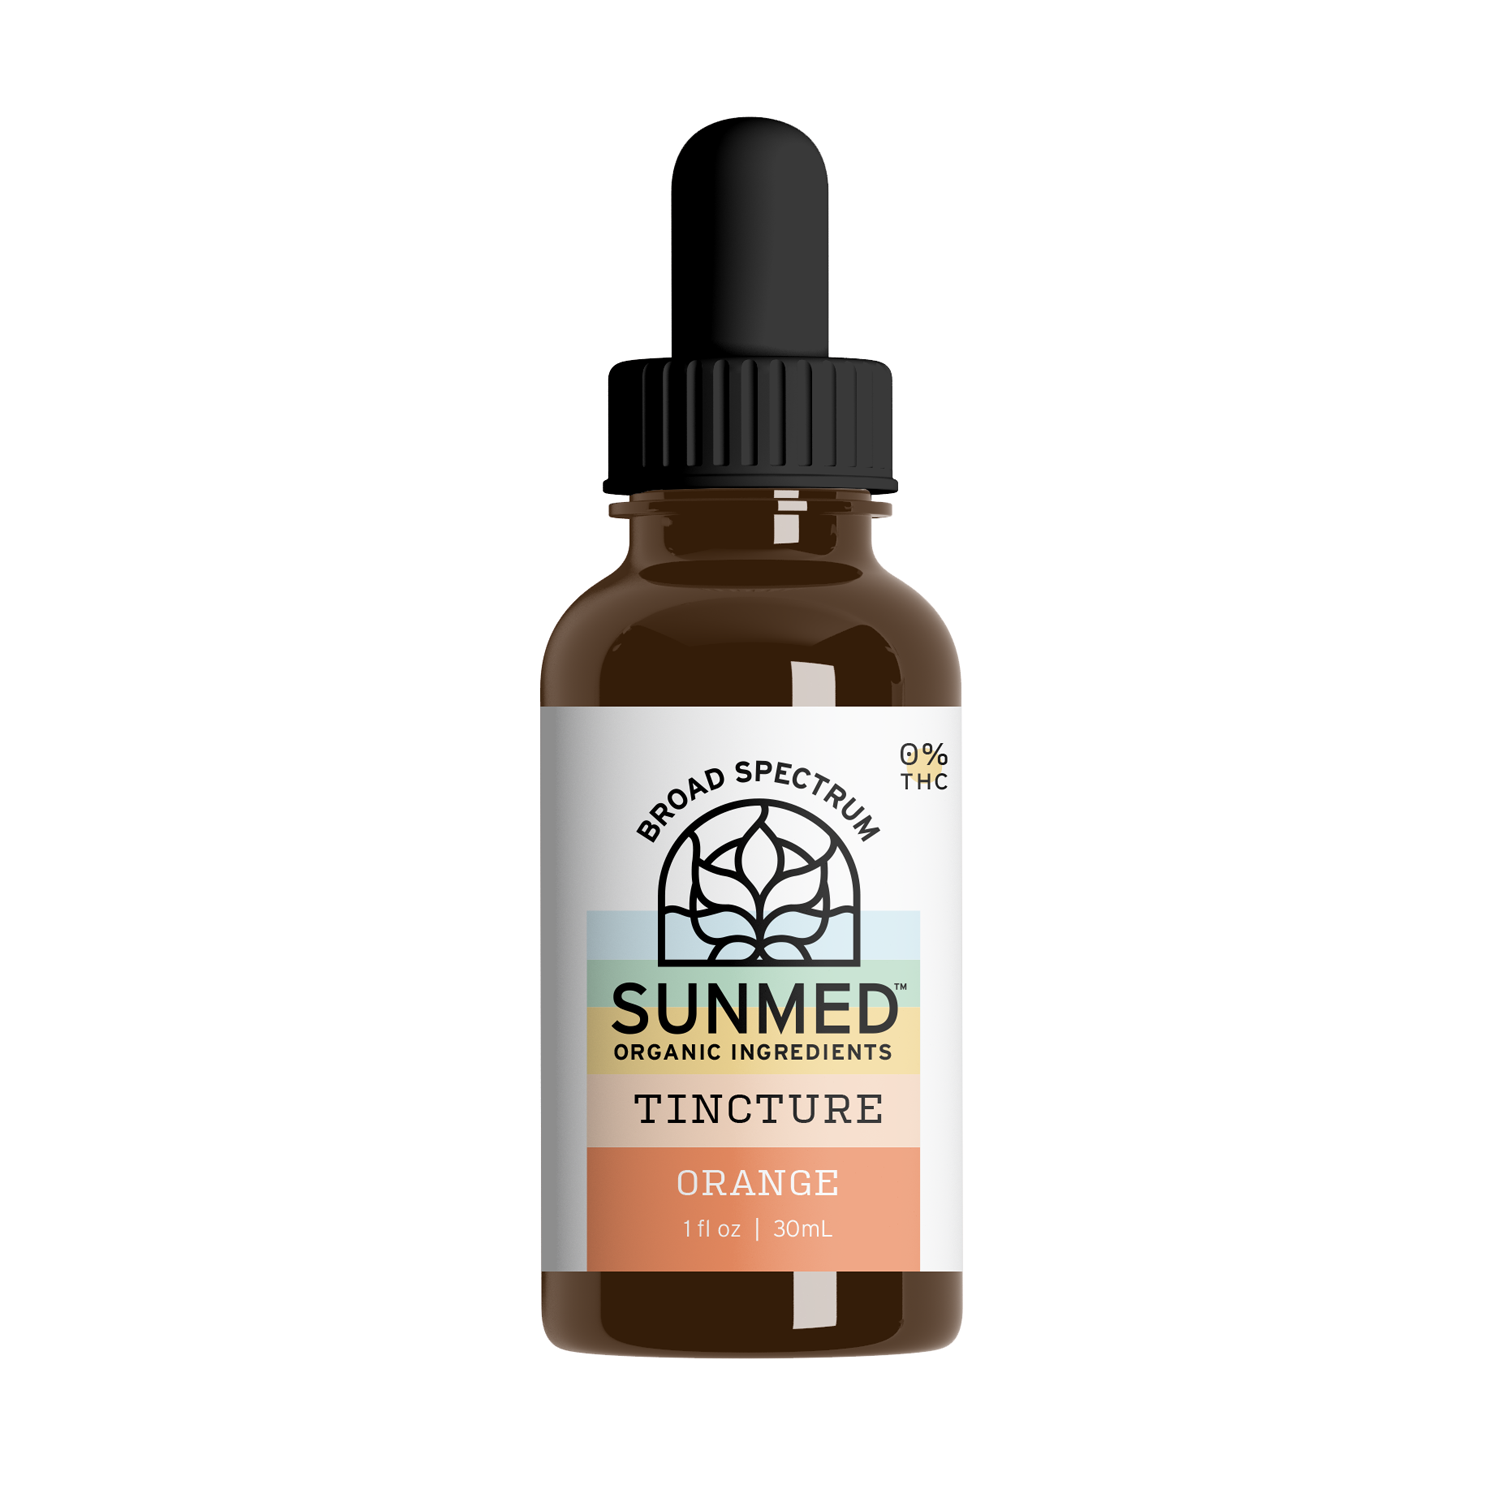 How To Take Sunmed Cbd Oil Tincture